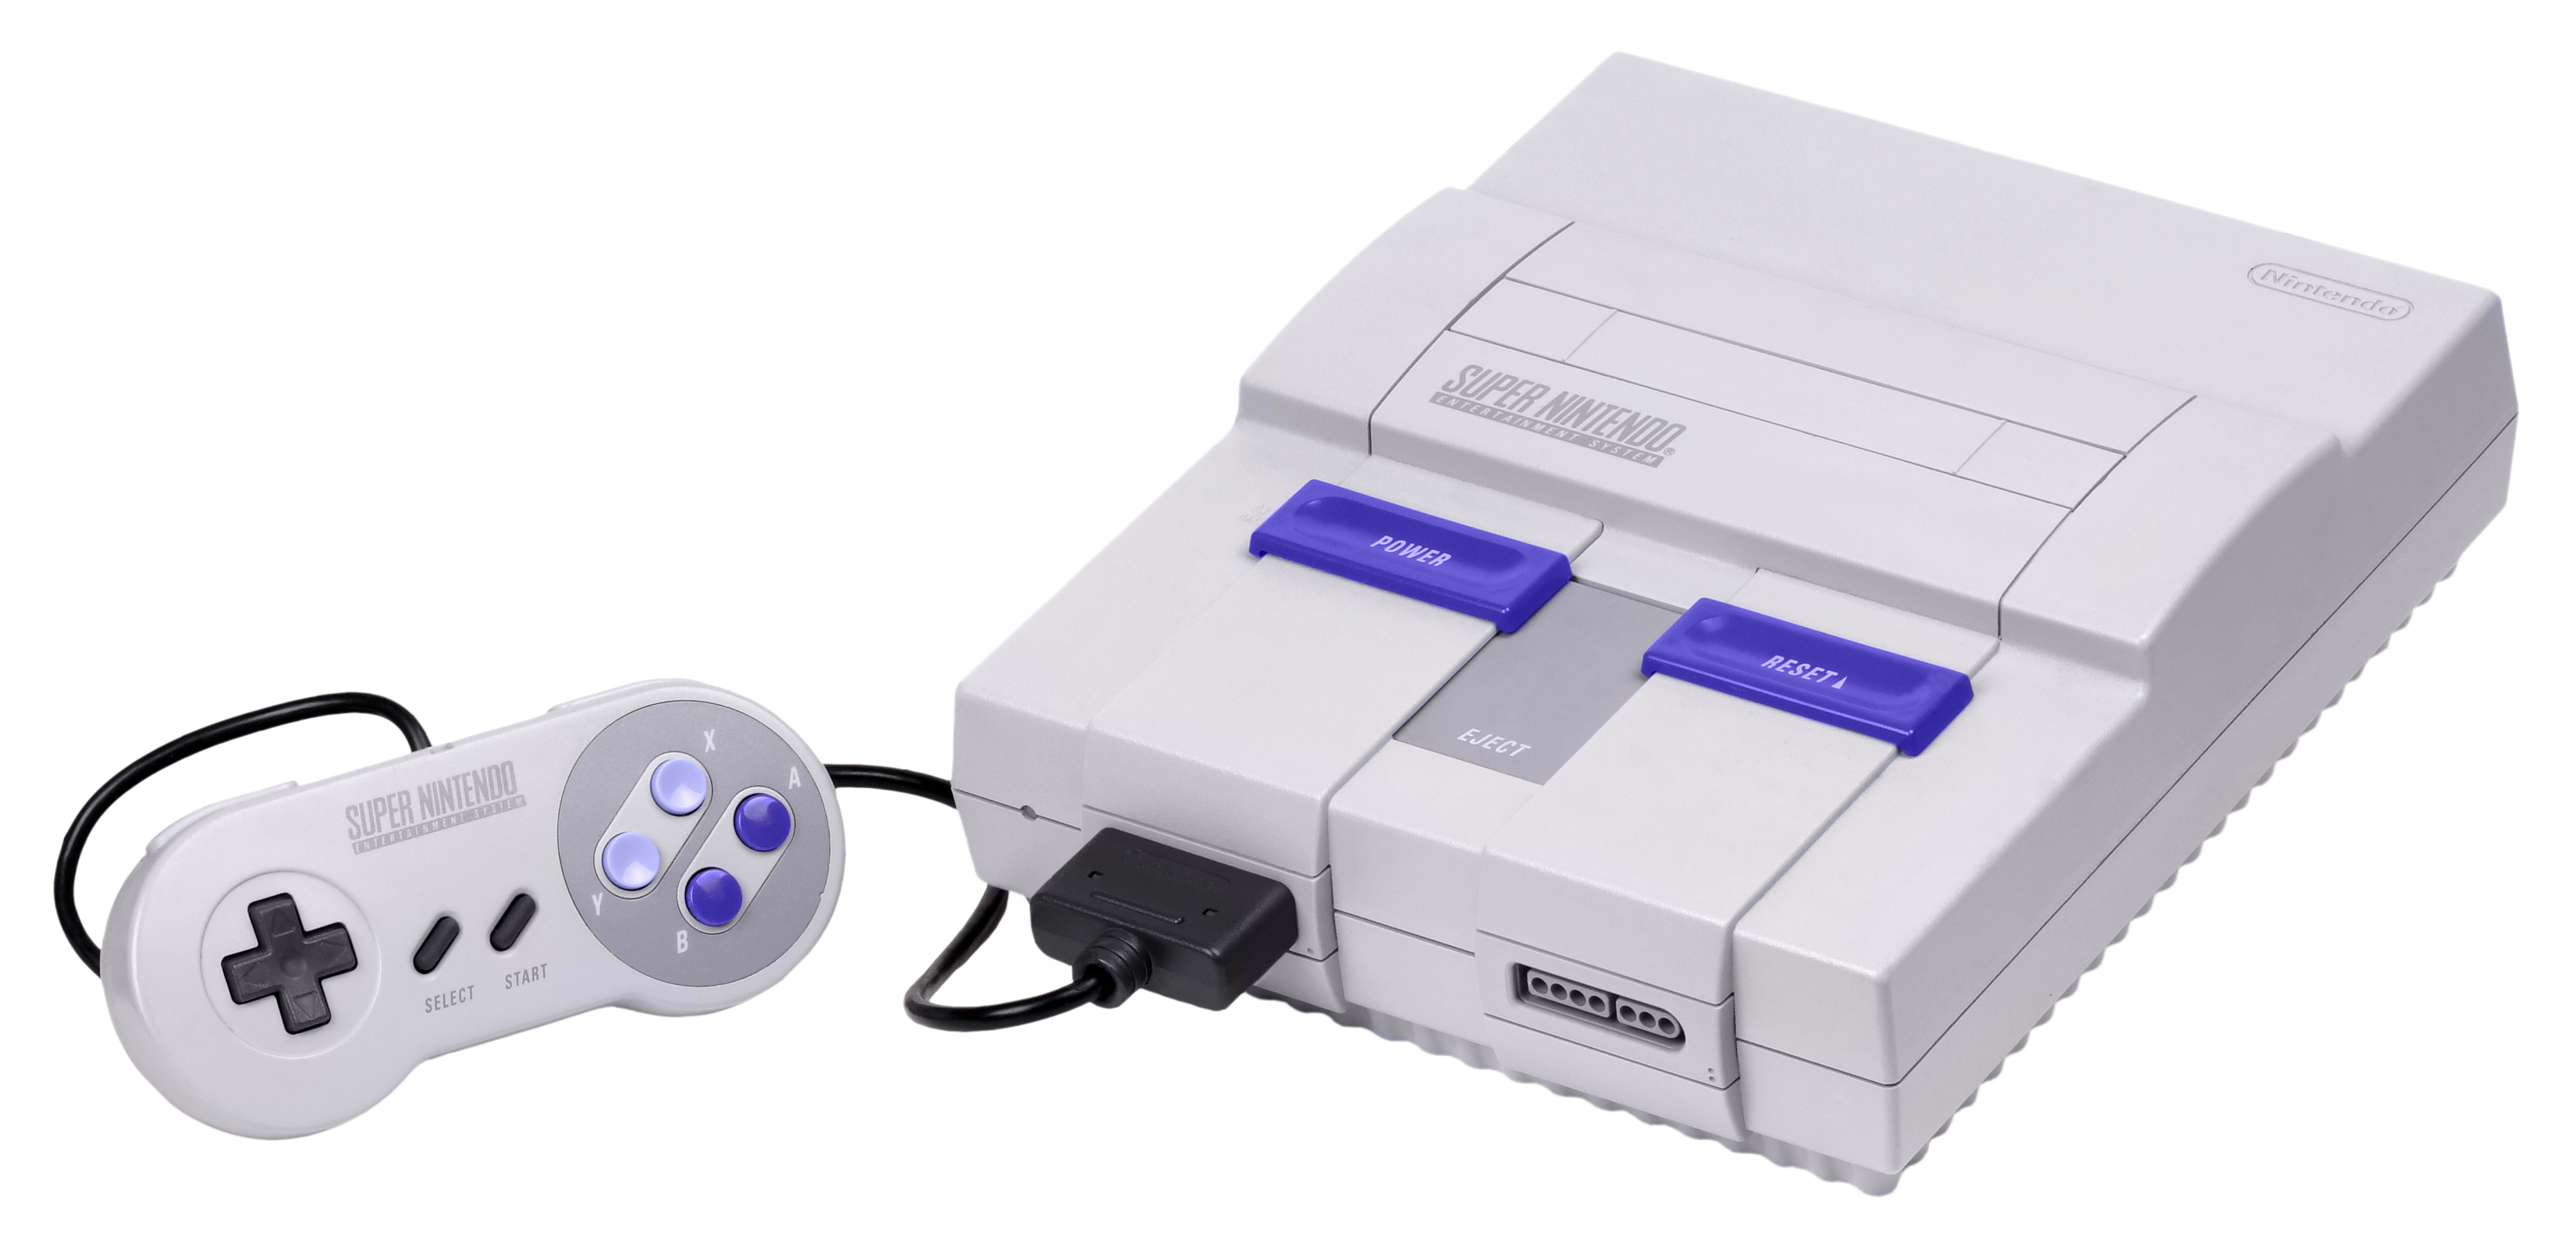 Rumor: Nintendo to Launch SNES Classic by end of year